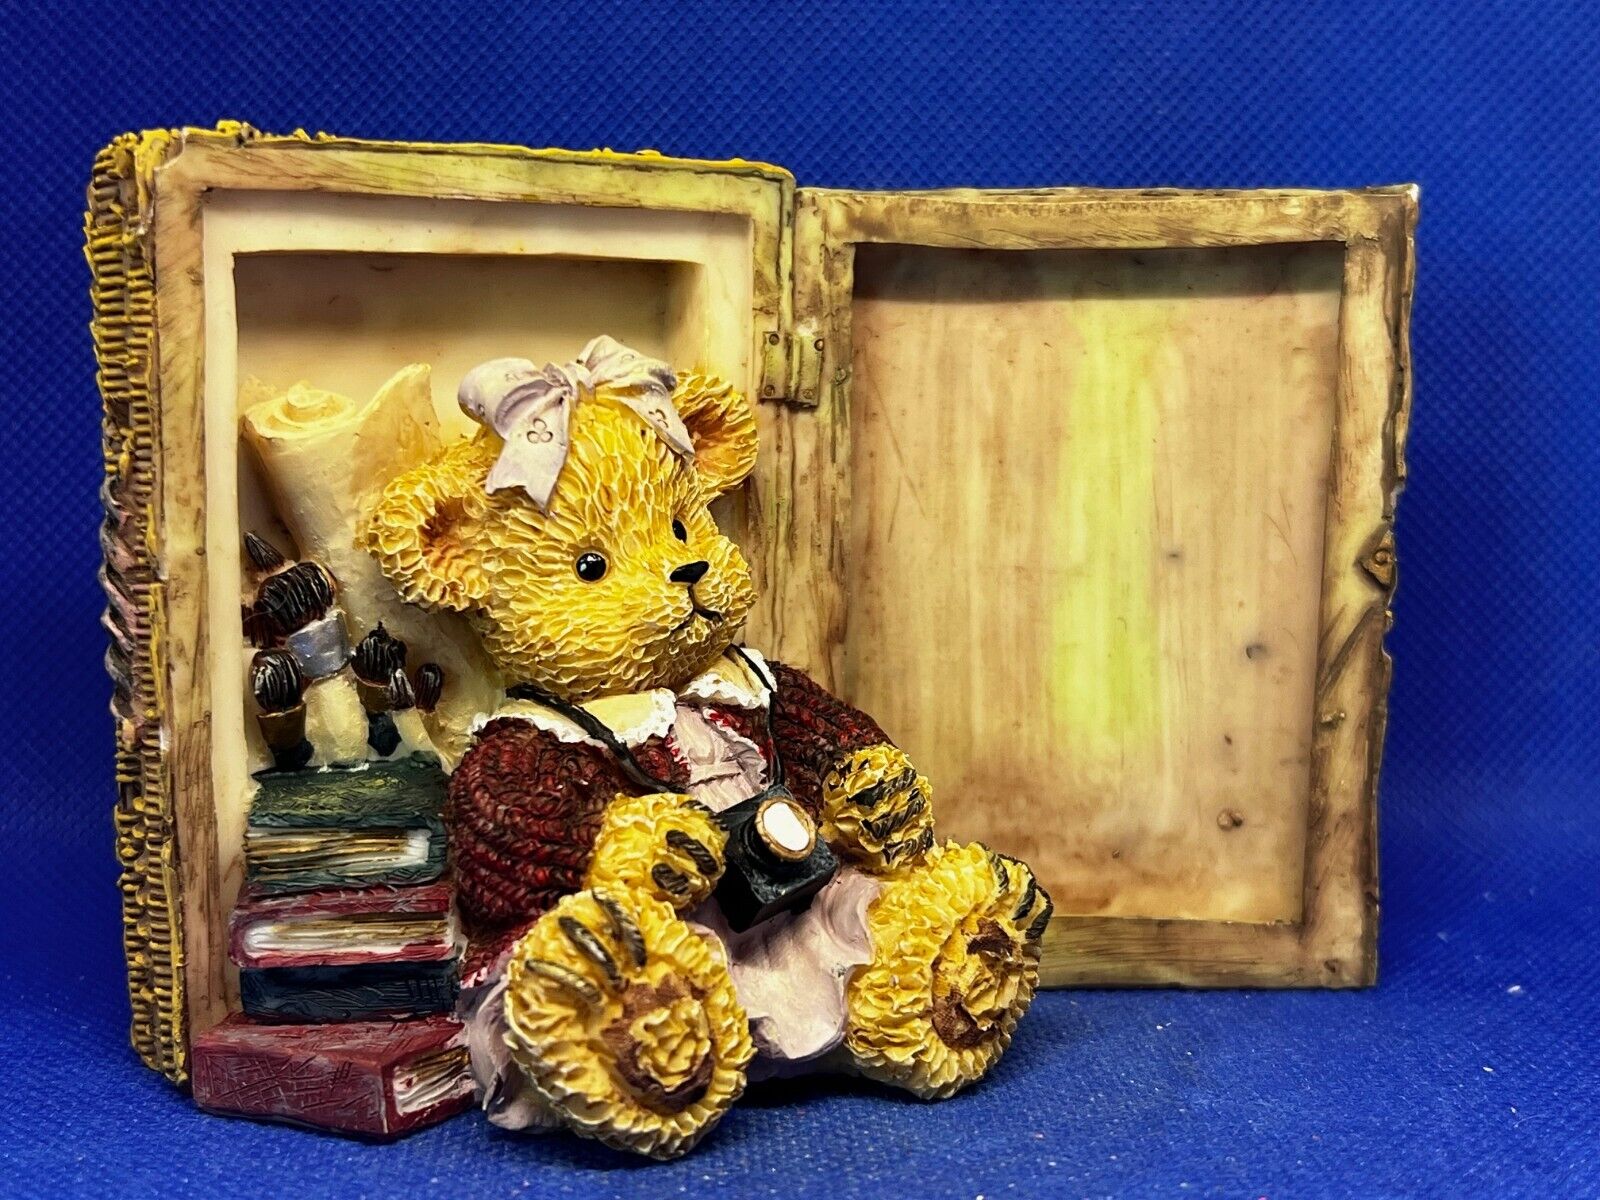 Vintage Girl Teddy Bear in Wicker Box with Books and Camera Figurine